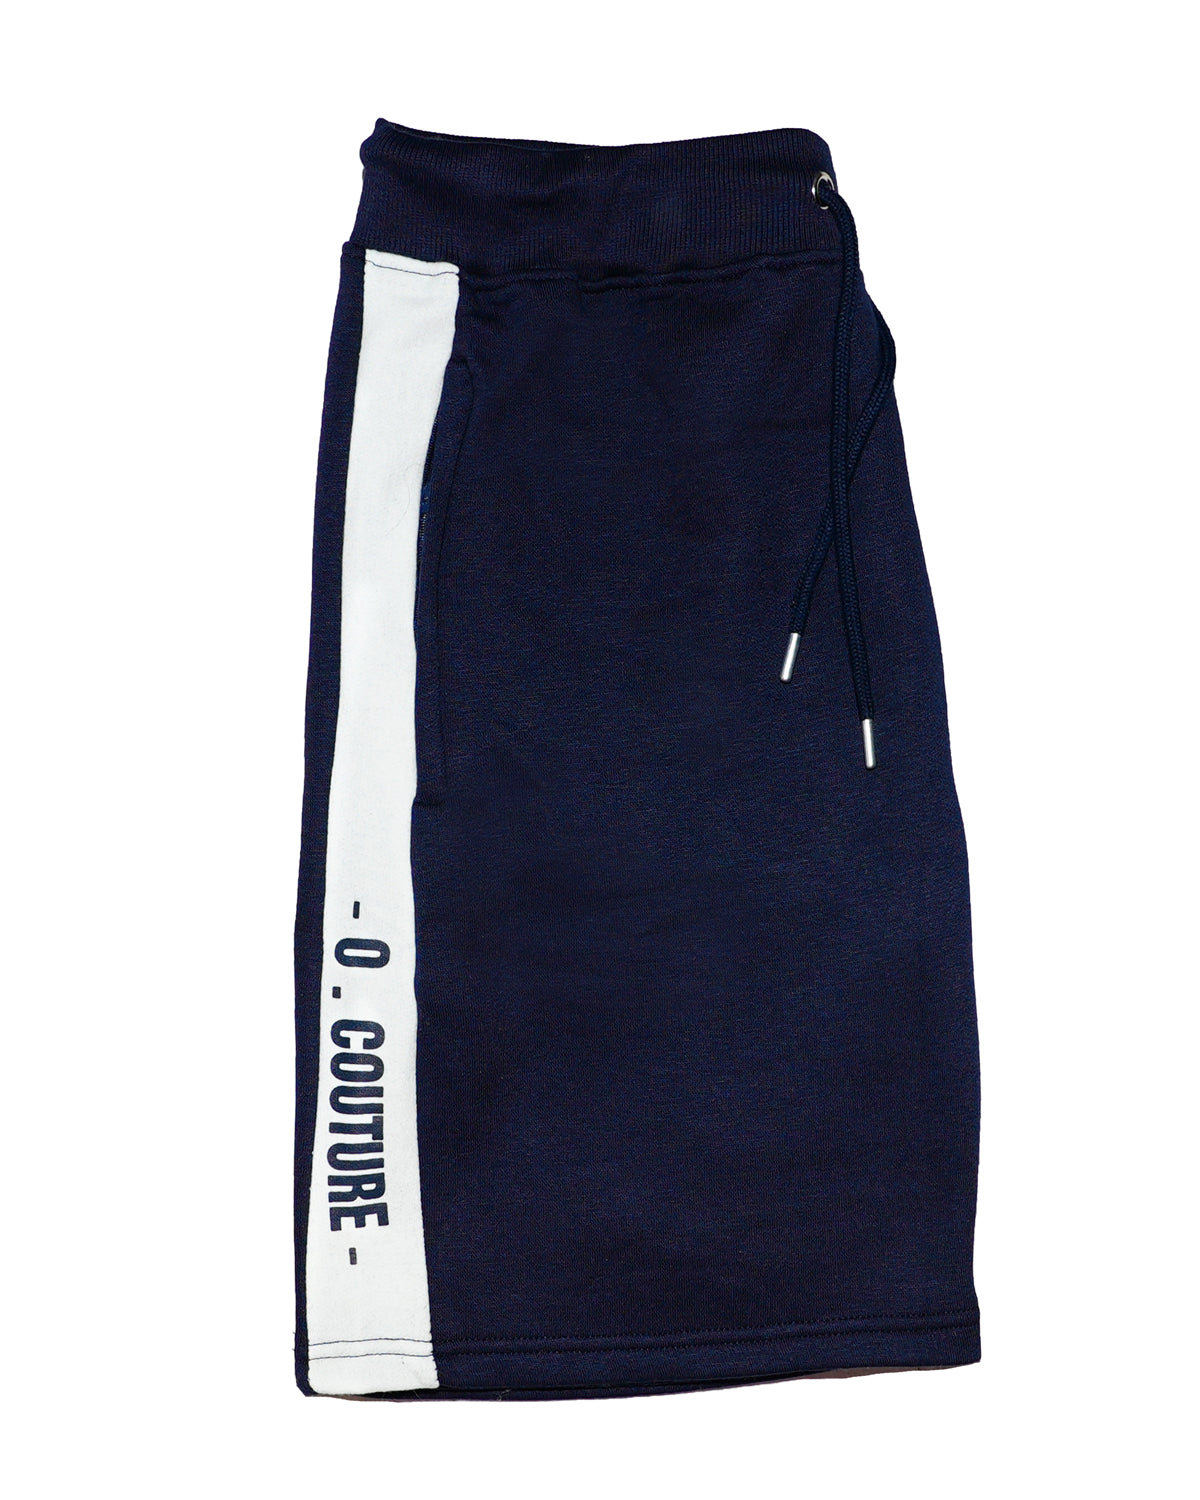 Navy Short Set with Jersey Crew Neck Jumper and Fleece Shorts (2058)